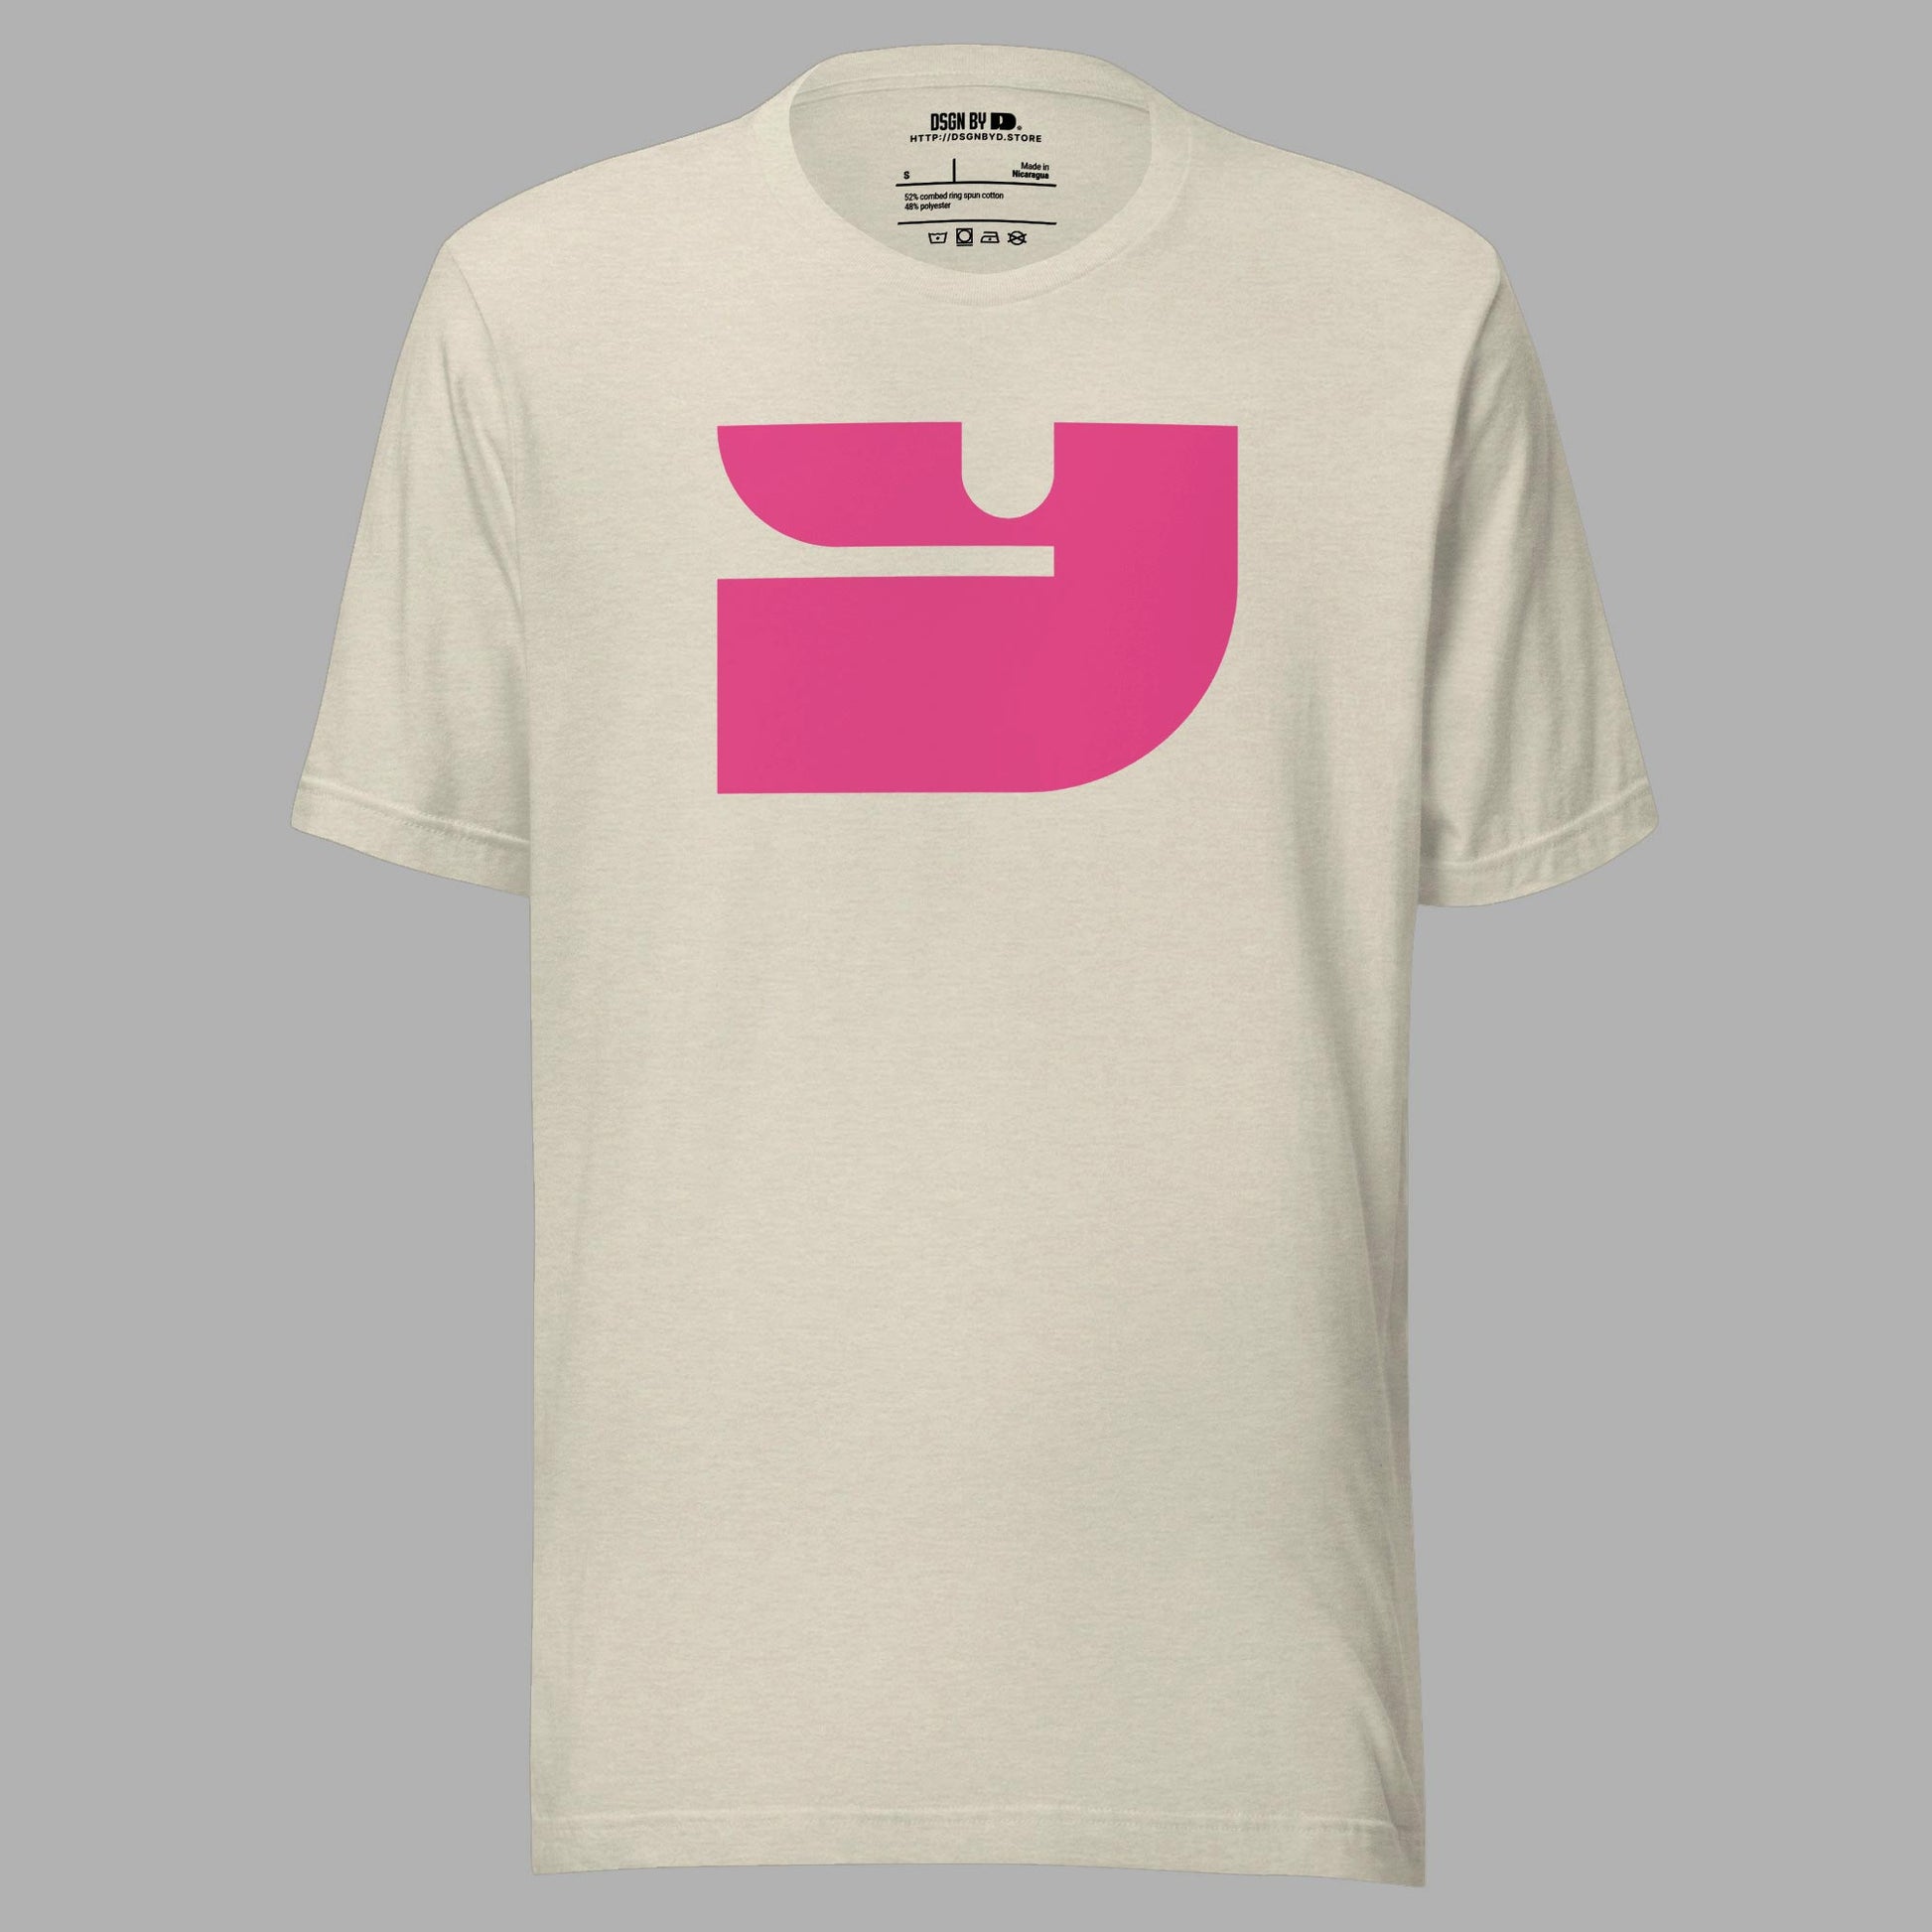 A beige cotton unisex graphic tee with letter Y.